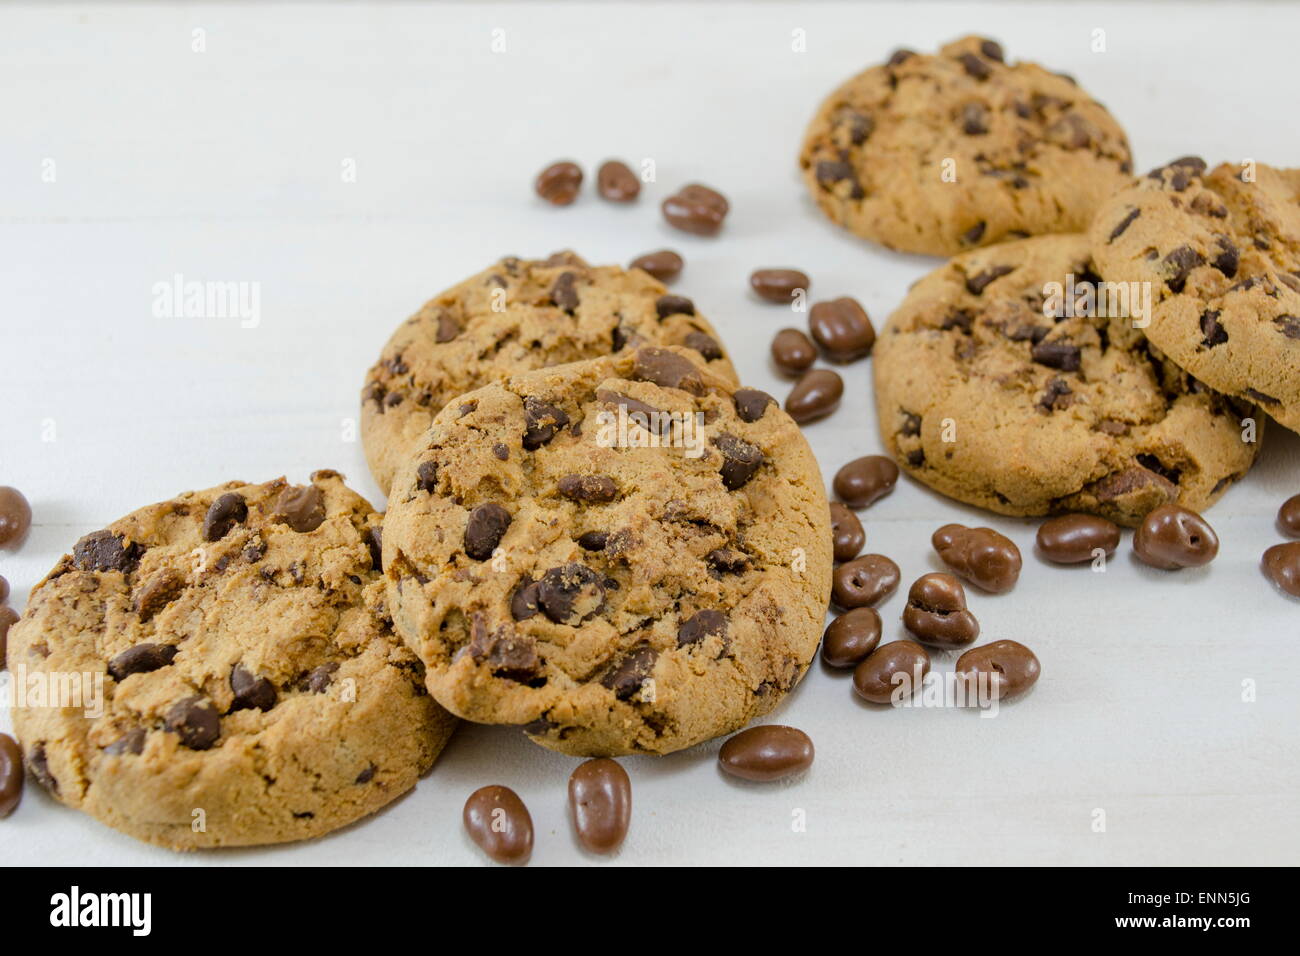 Chocolate chip cookies on white Stock Photo